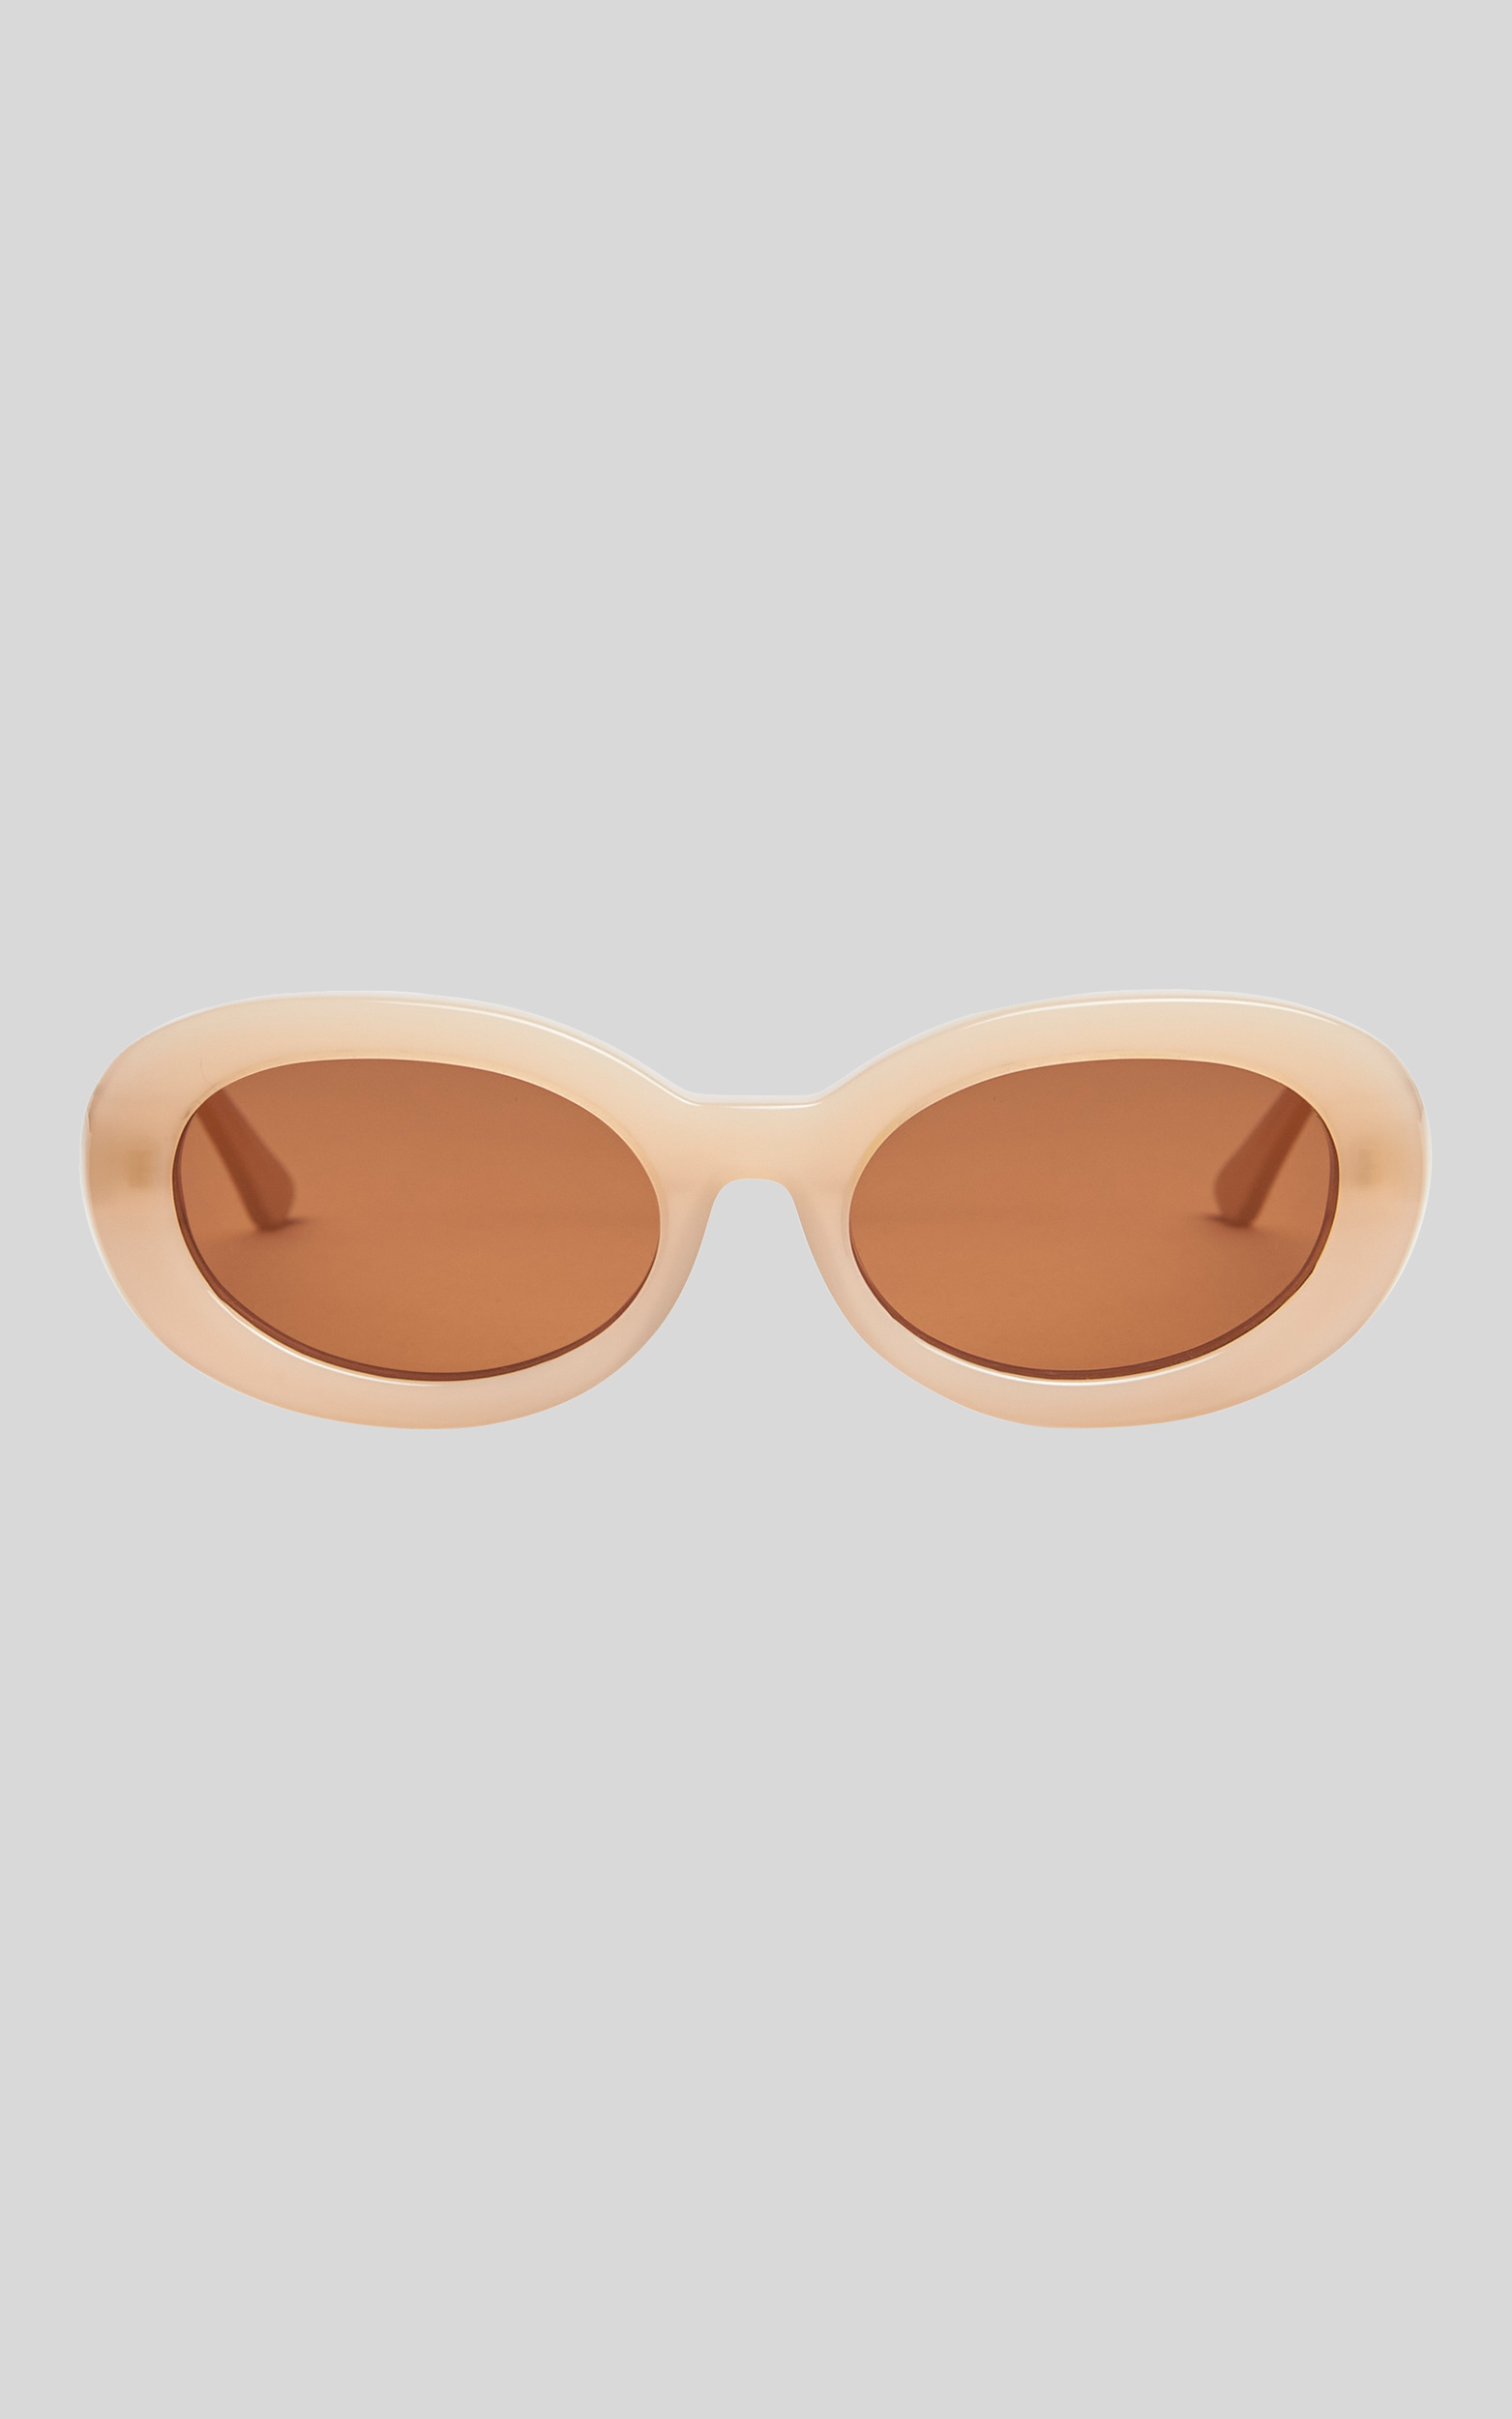 Banbe Eyewear - The Lily in Milk Brown - NoSize, BRN2, hi-res image number null